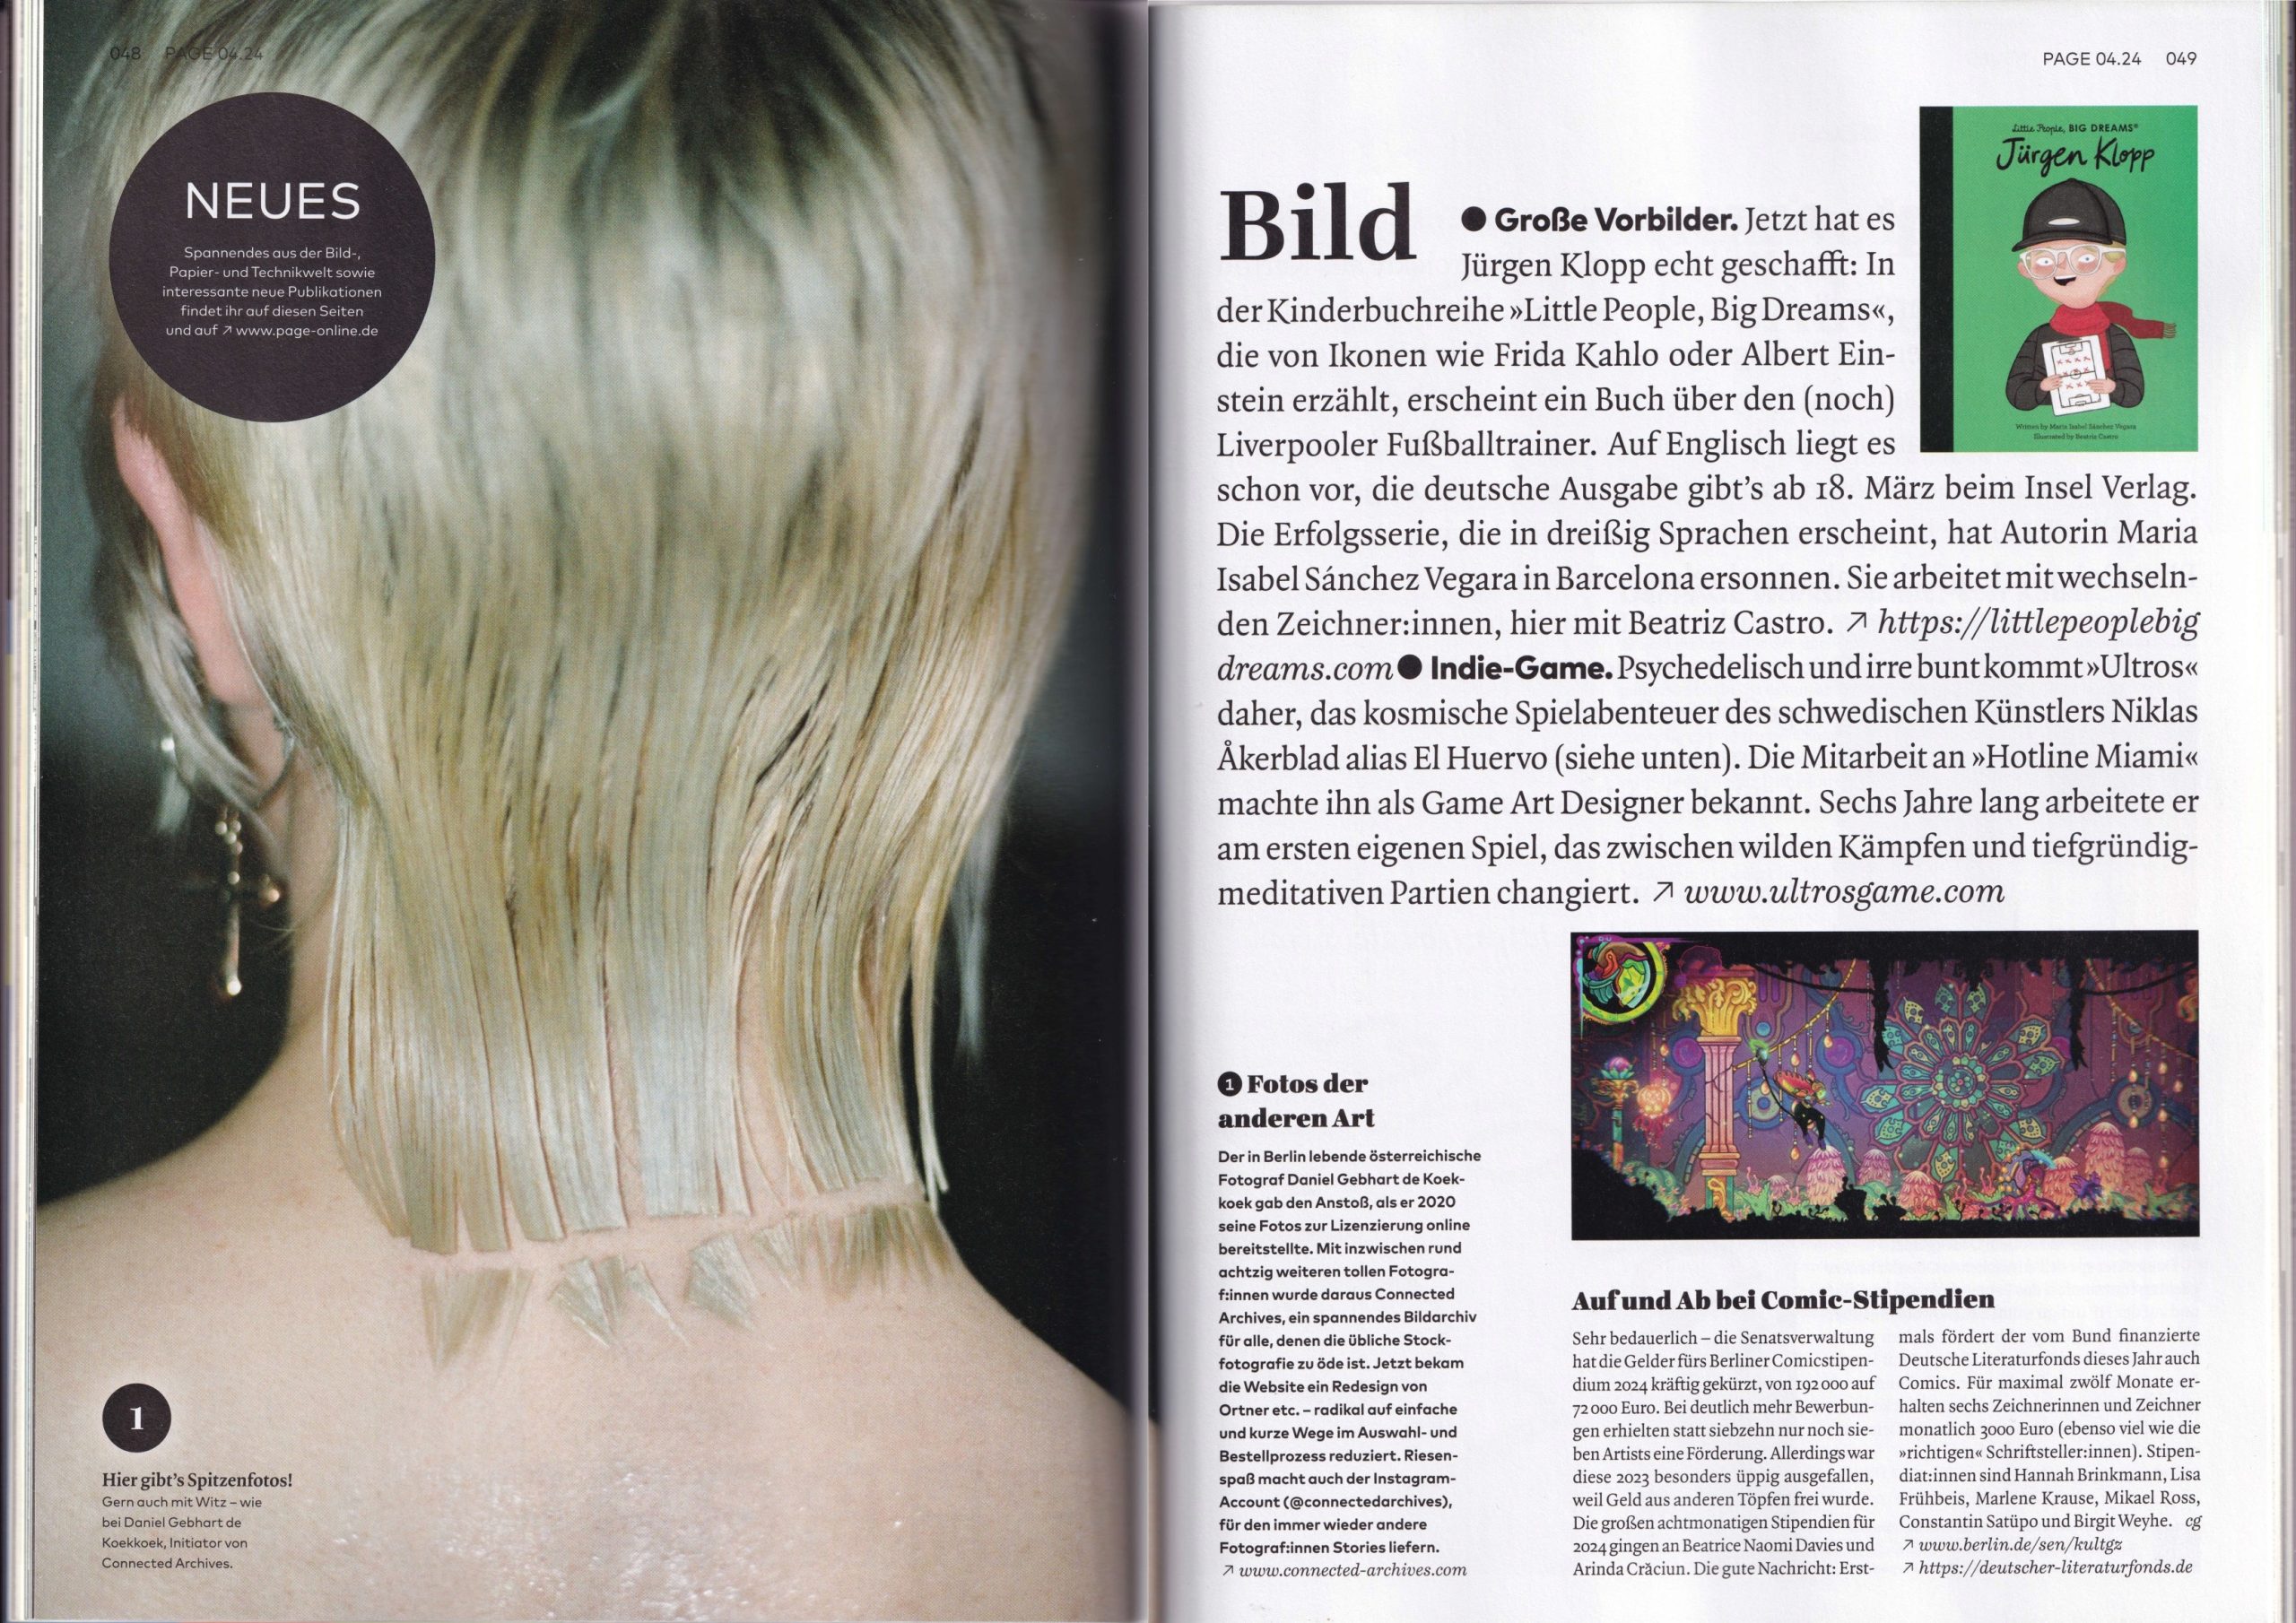 Connected Archives in Page magazine